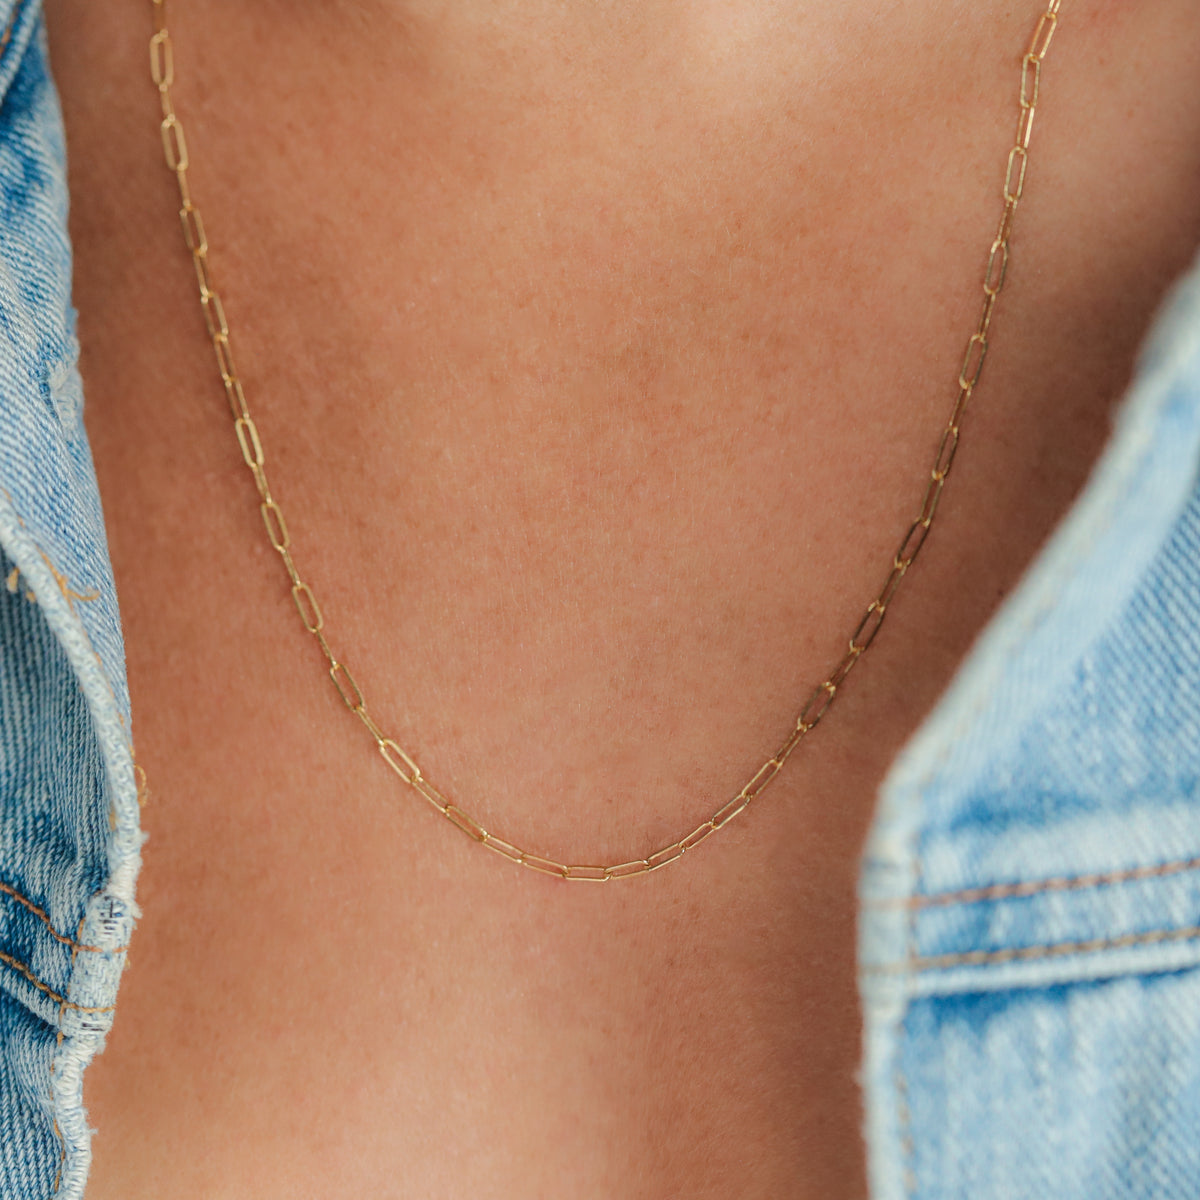 Paperclip necklace - 14K gold filled